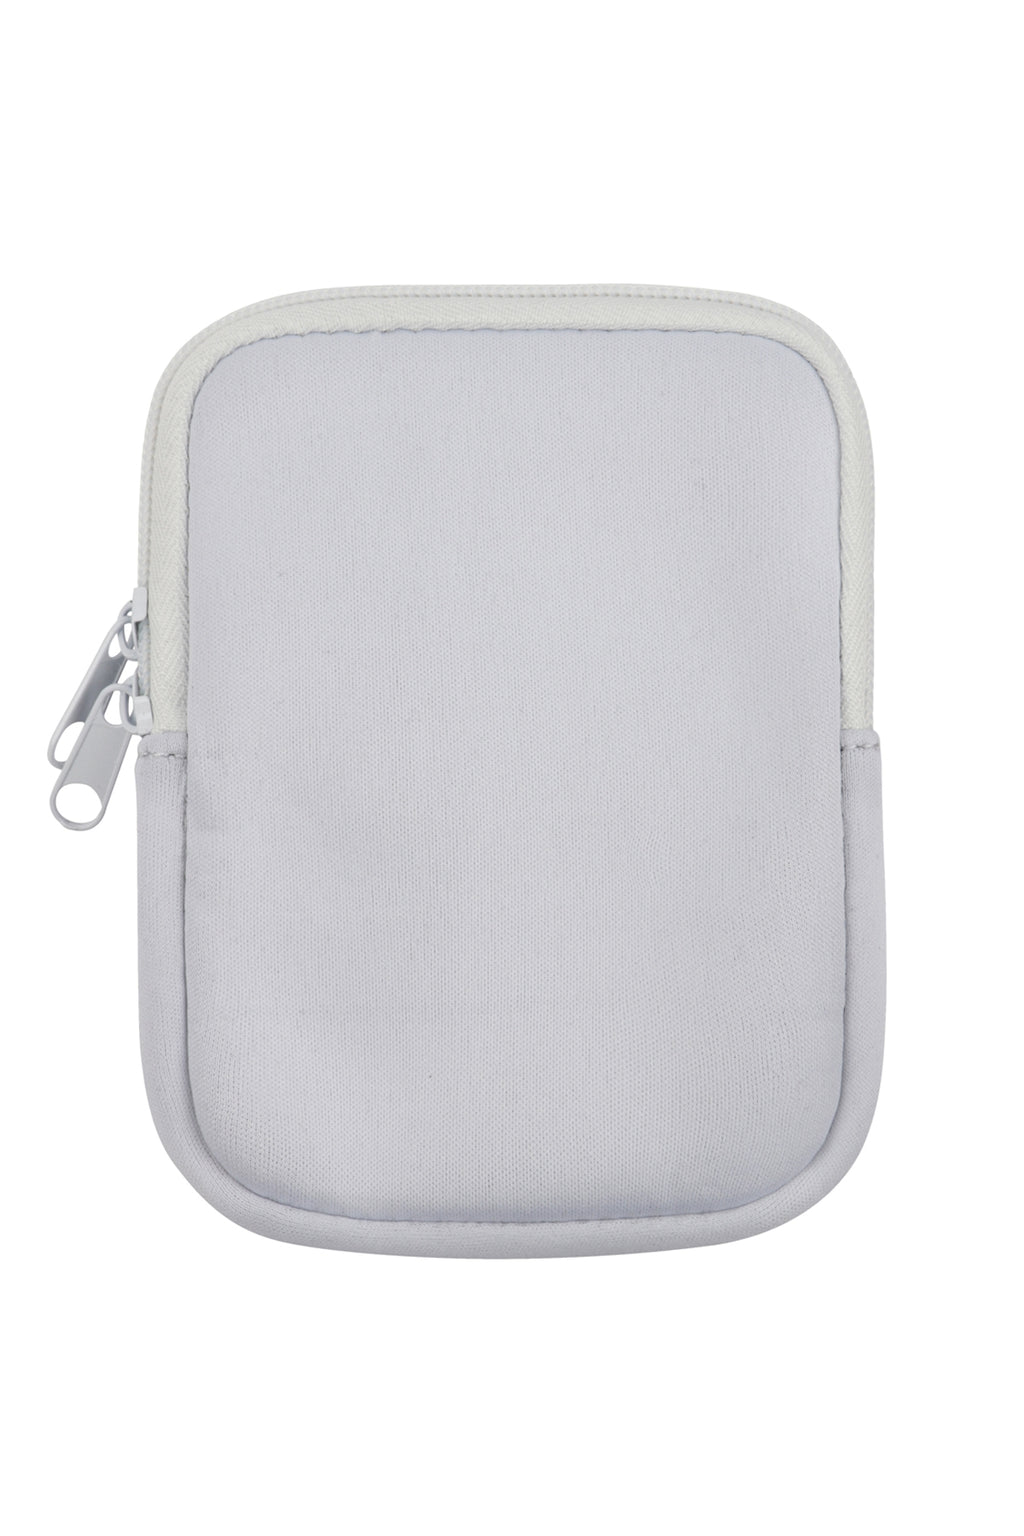 Water Bottle Pouch White - Pack of 6